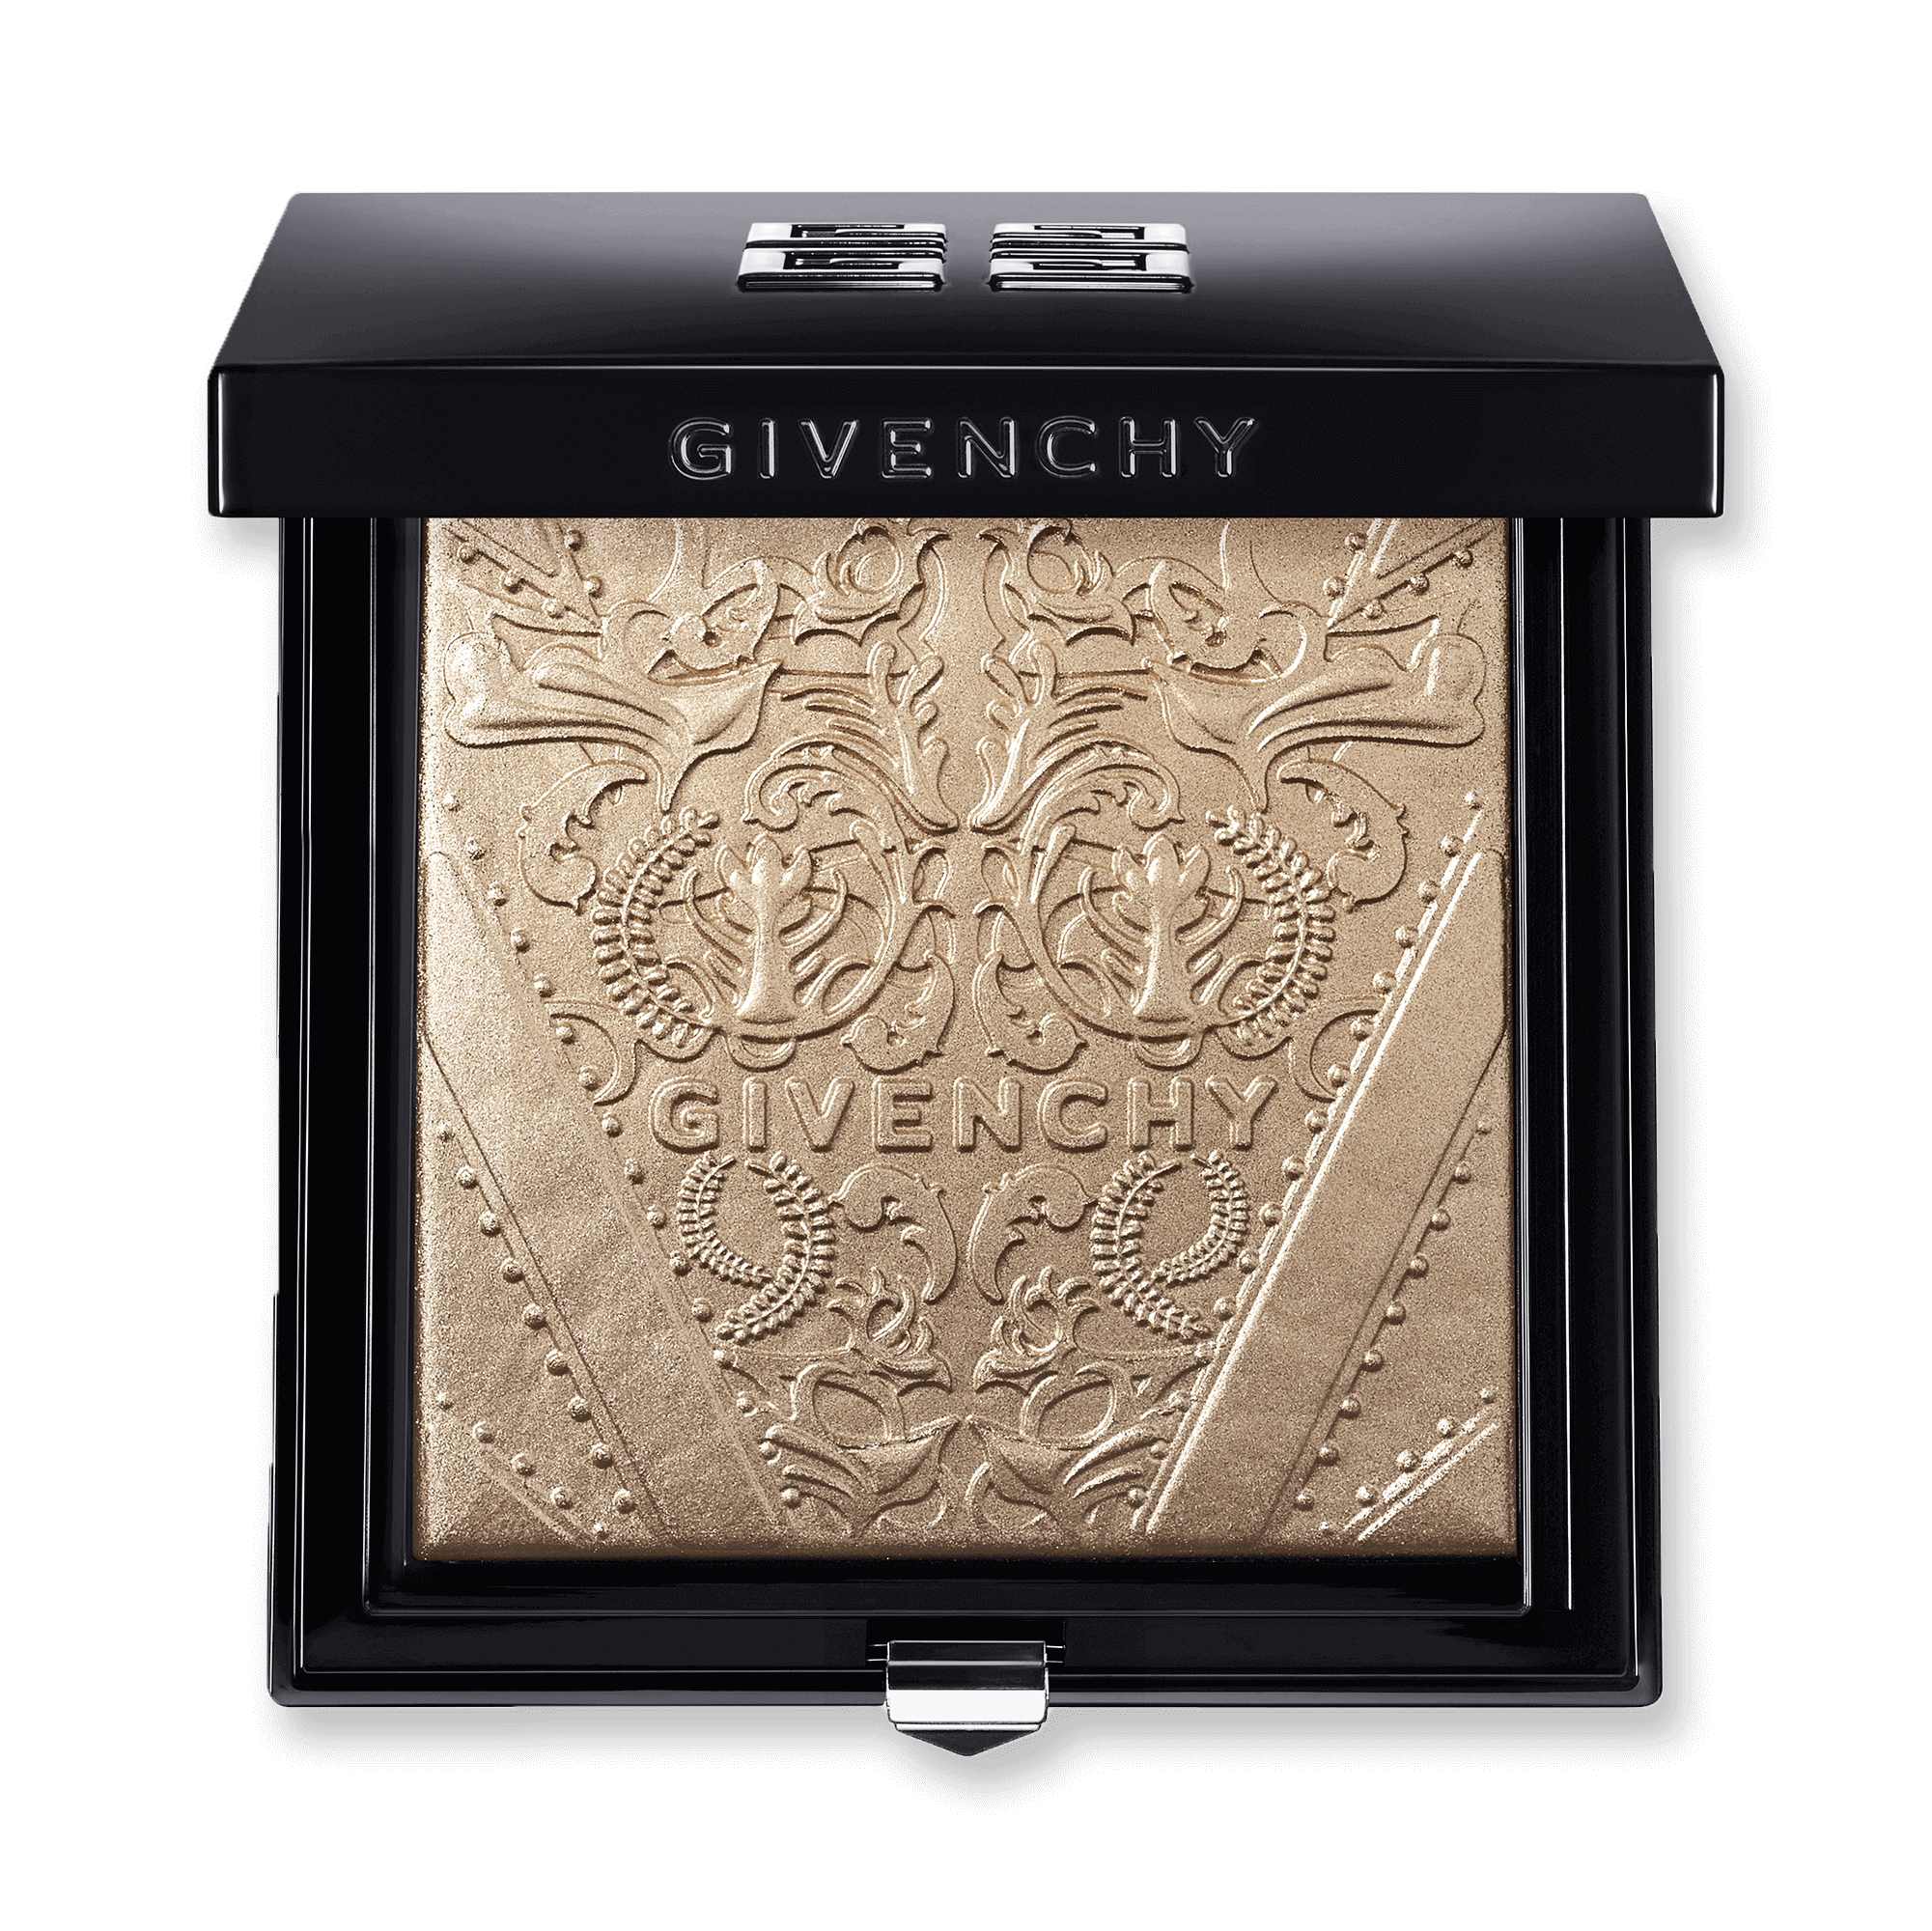 teint couture shimmer powder givenchy